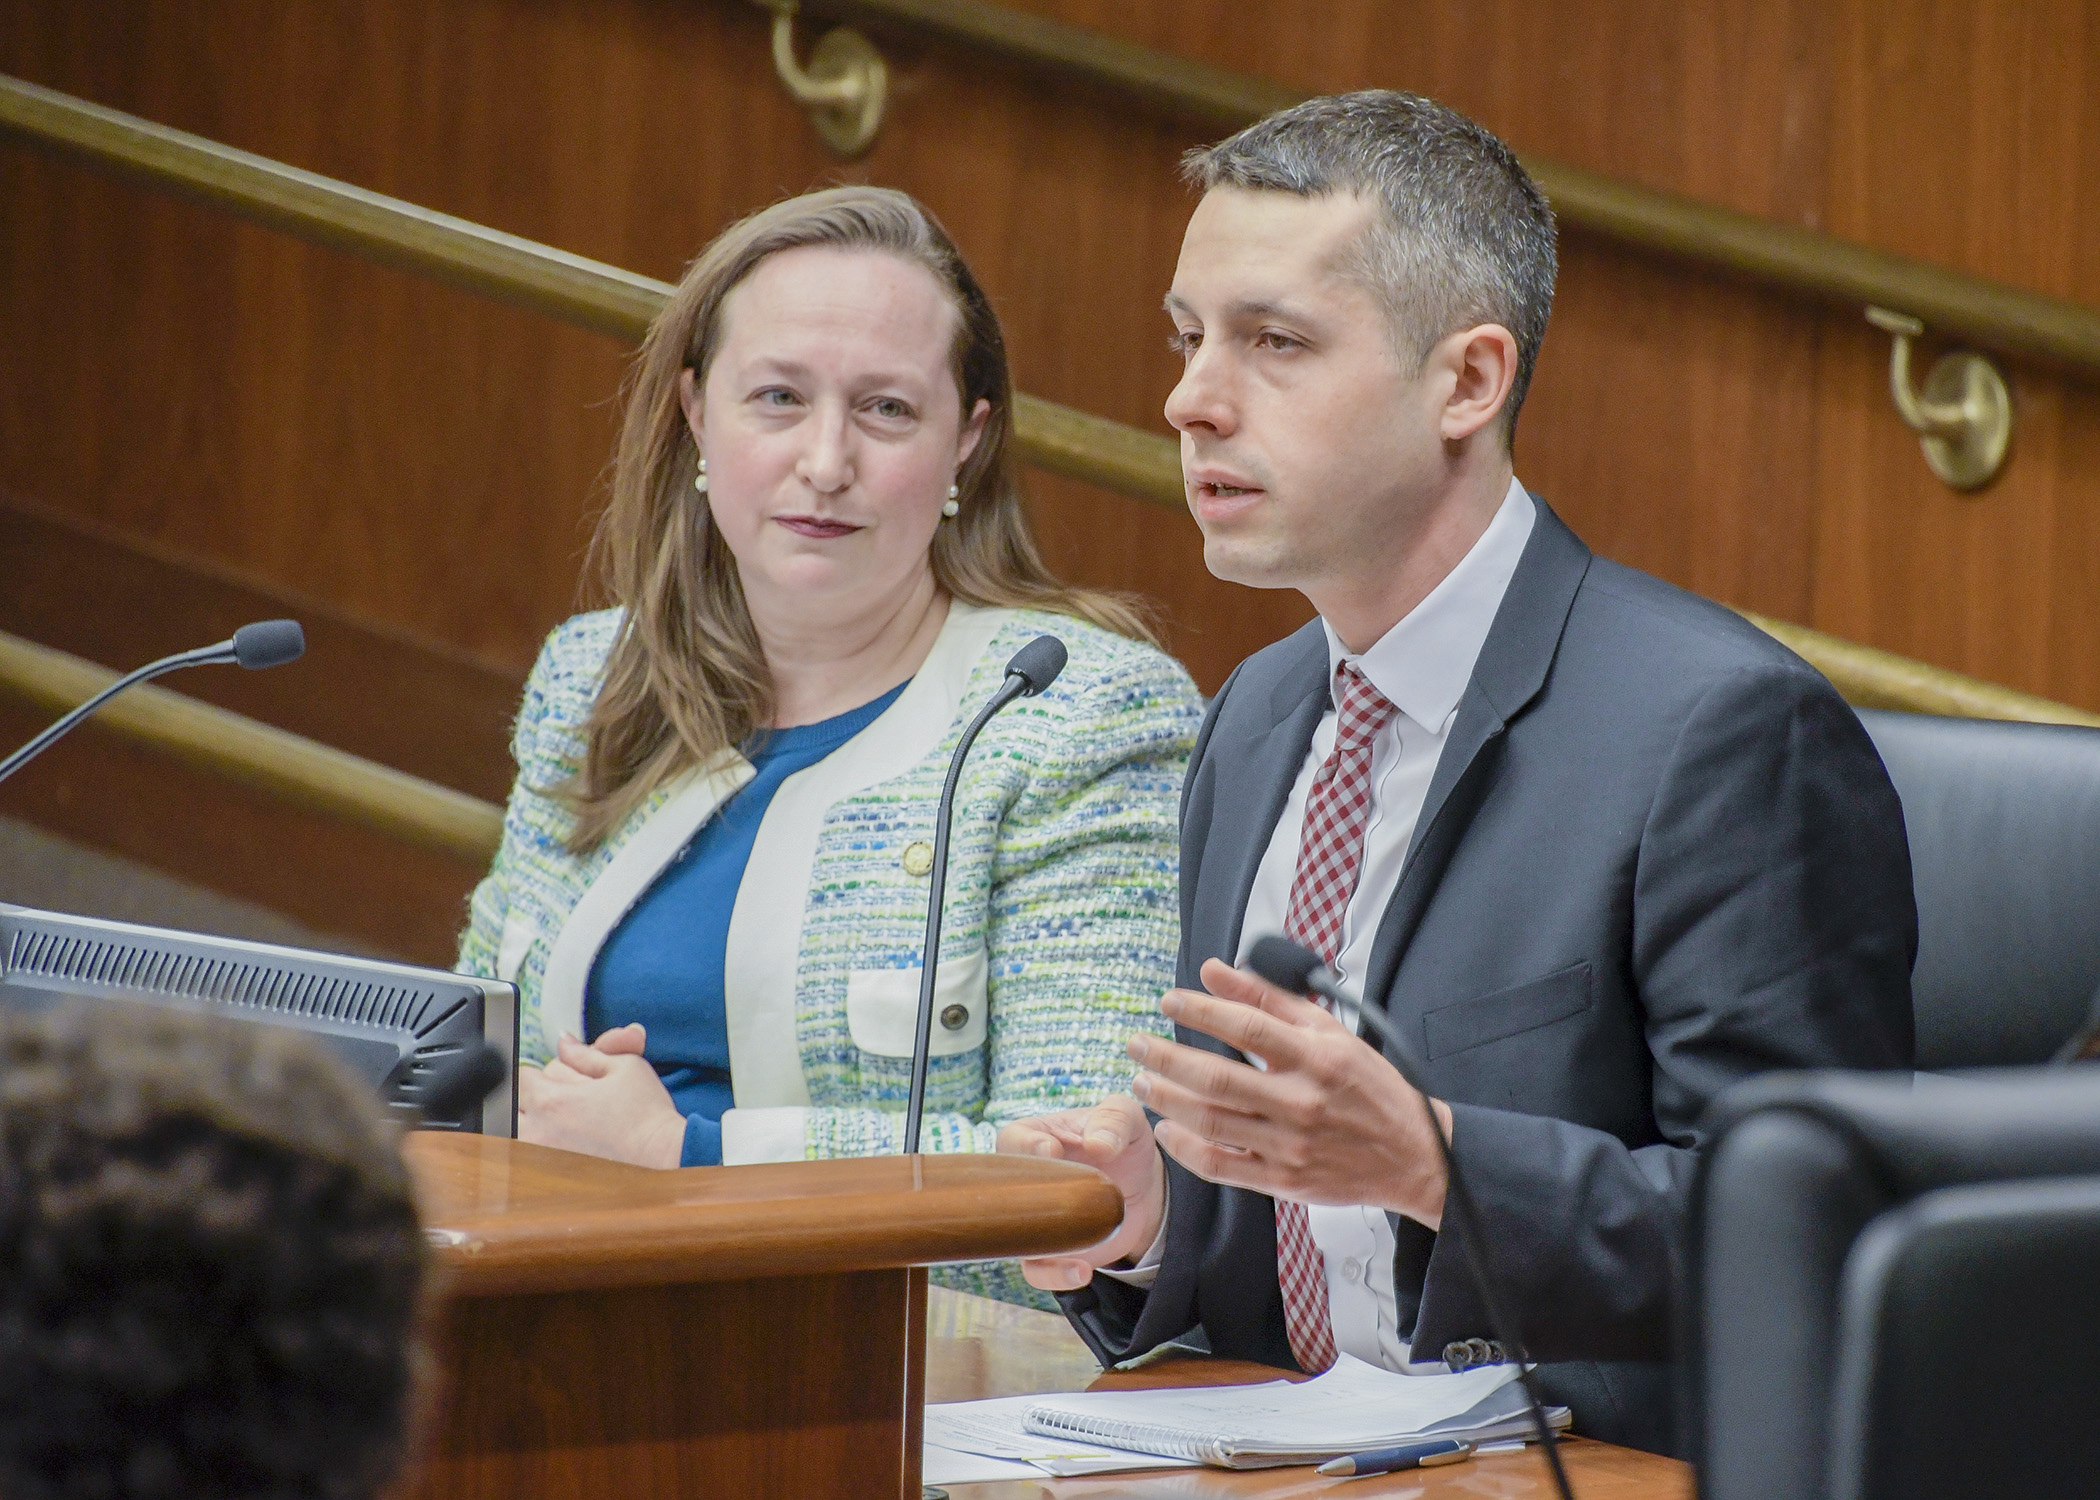 Sam Oliker-Friedland, chief counsel for the Campaign for Secure and Modern Elections, testifies before the House Subcommittee on Elections March 4 in support of a bill sponsored by Rep. Kristin Bahner, left, to establish a system of automatic voter registration. Photo by Andrew VonBank